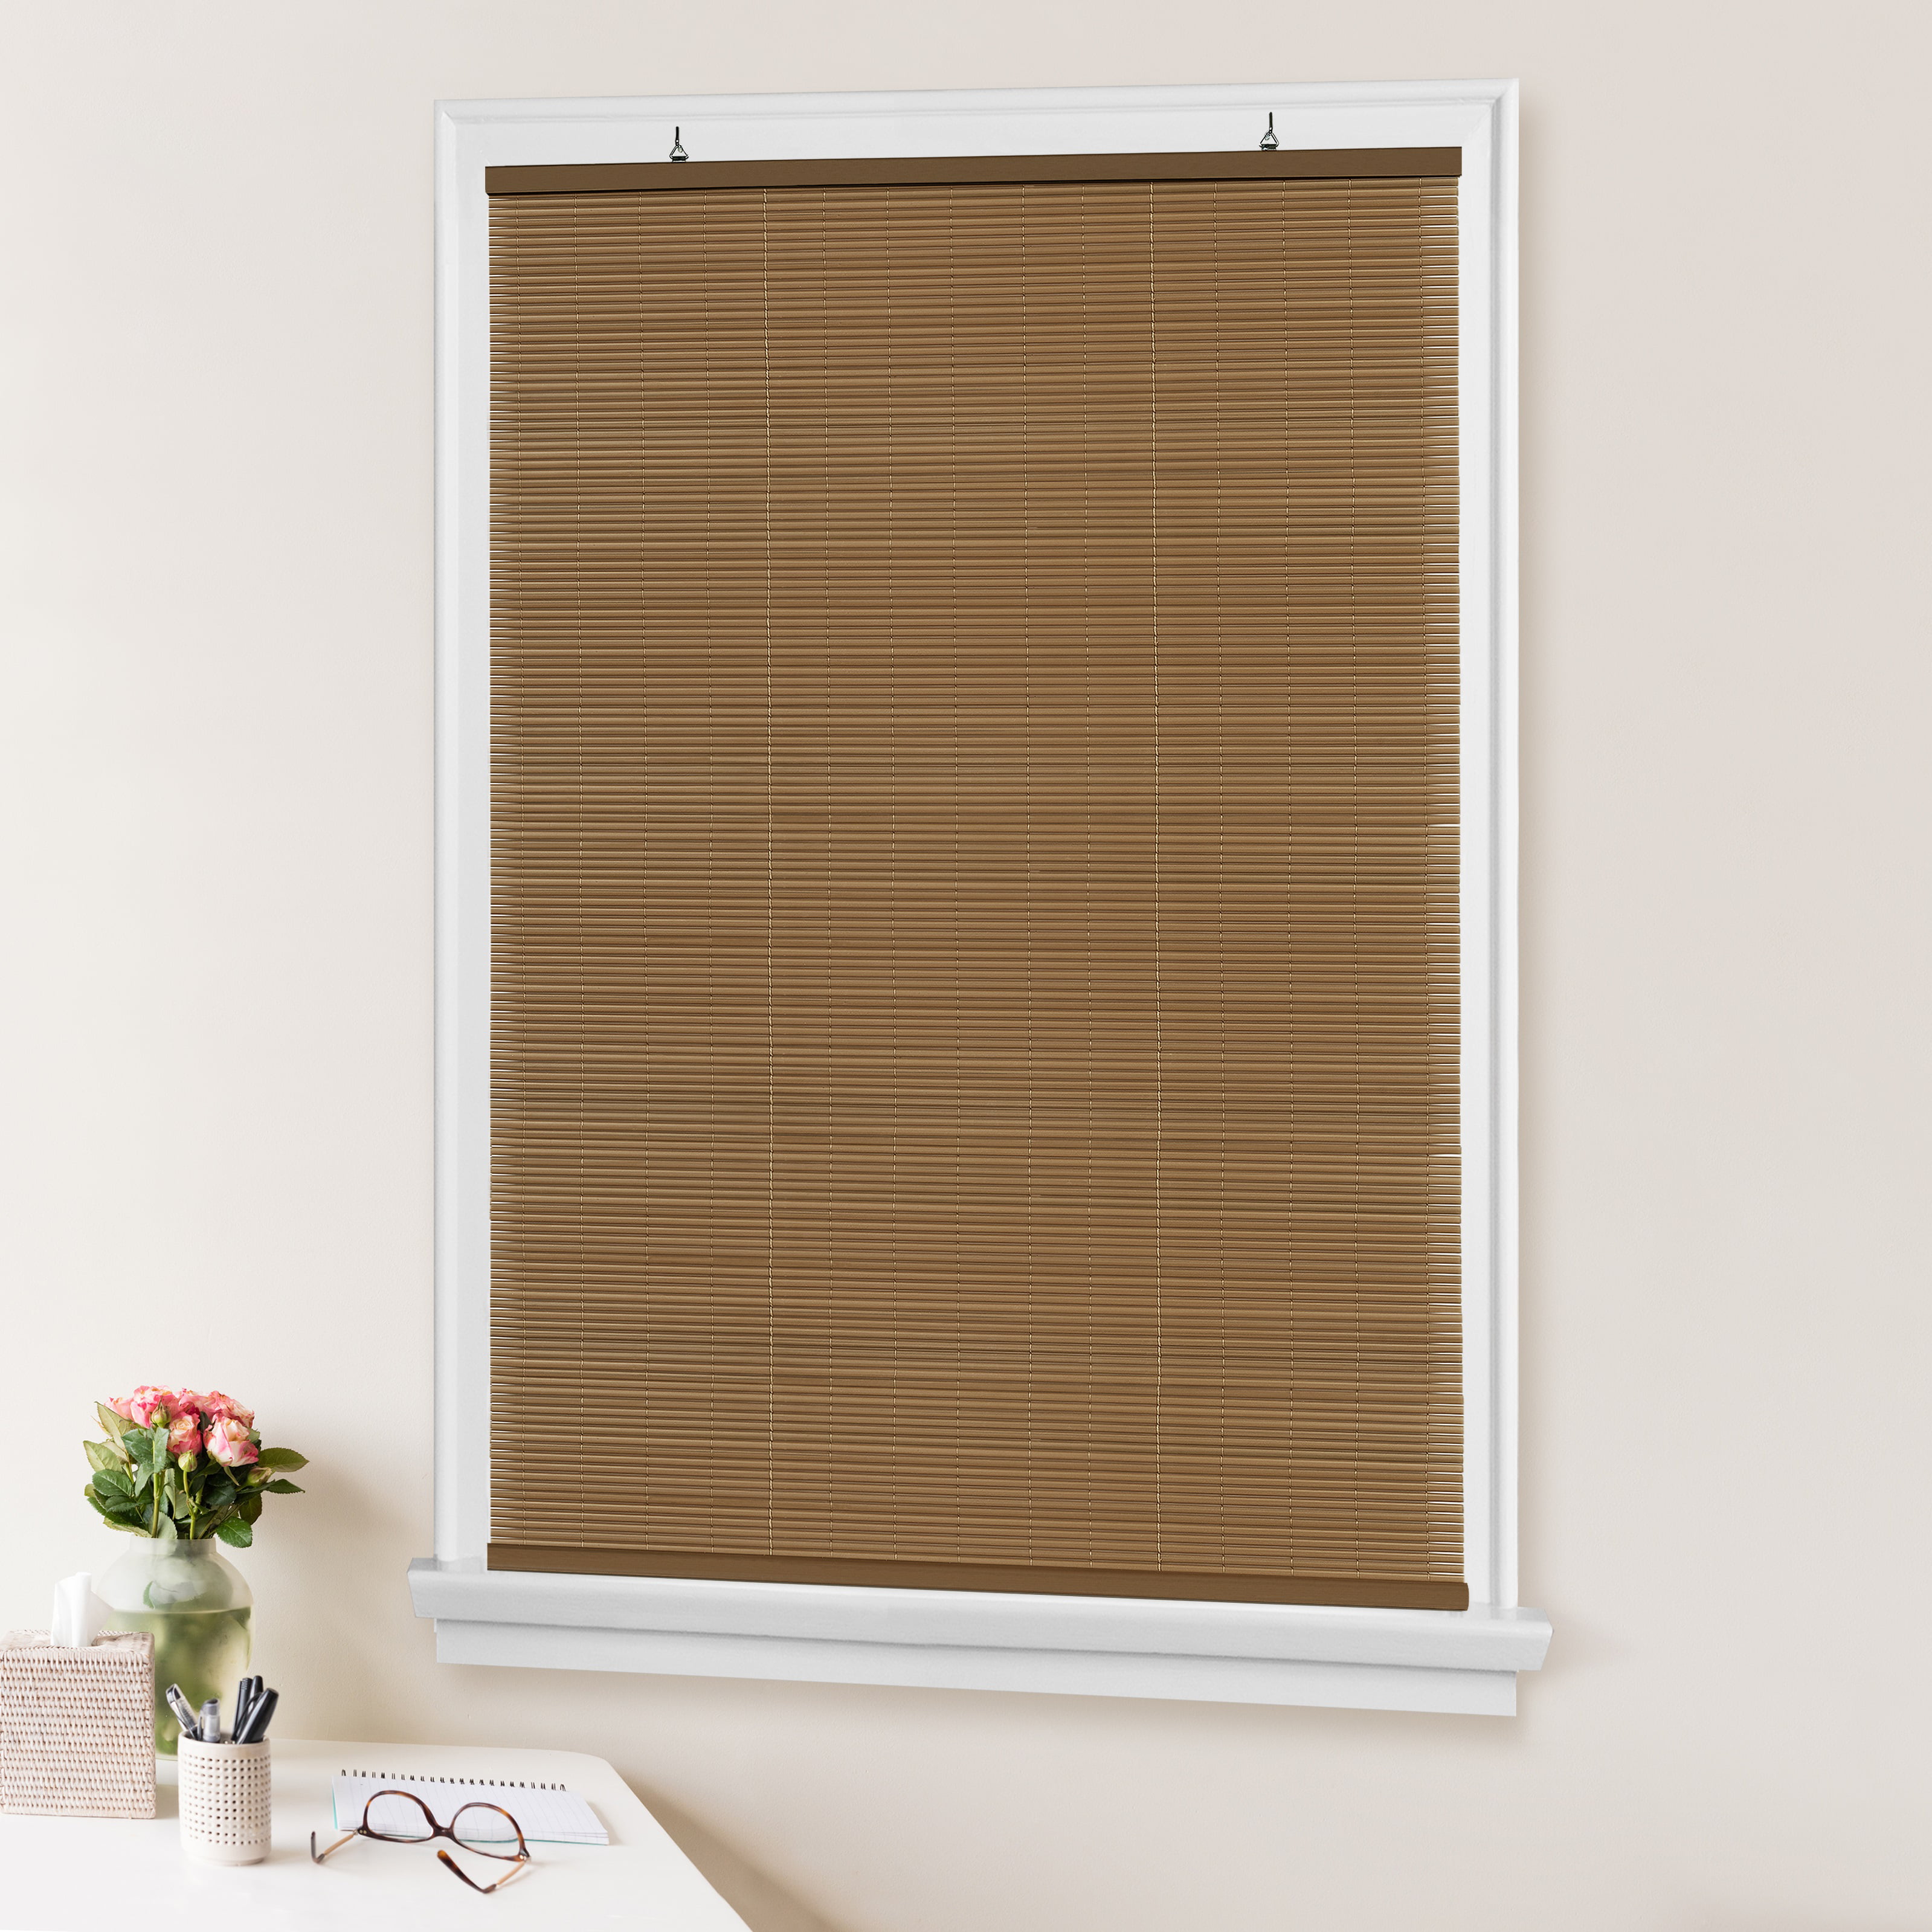 Royal Bath Simple Elegance by Ben&Jonah Cordless Eclipse Collection Vinyl Roll-Up Blind 36"L x 72"W - Woodtone